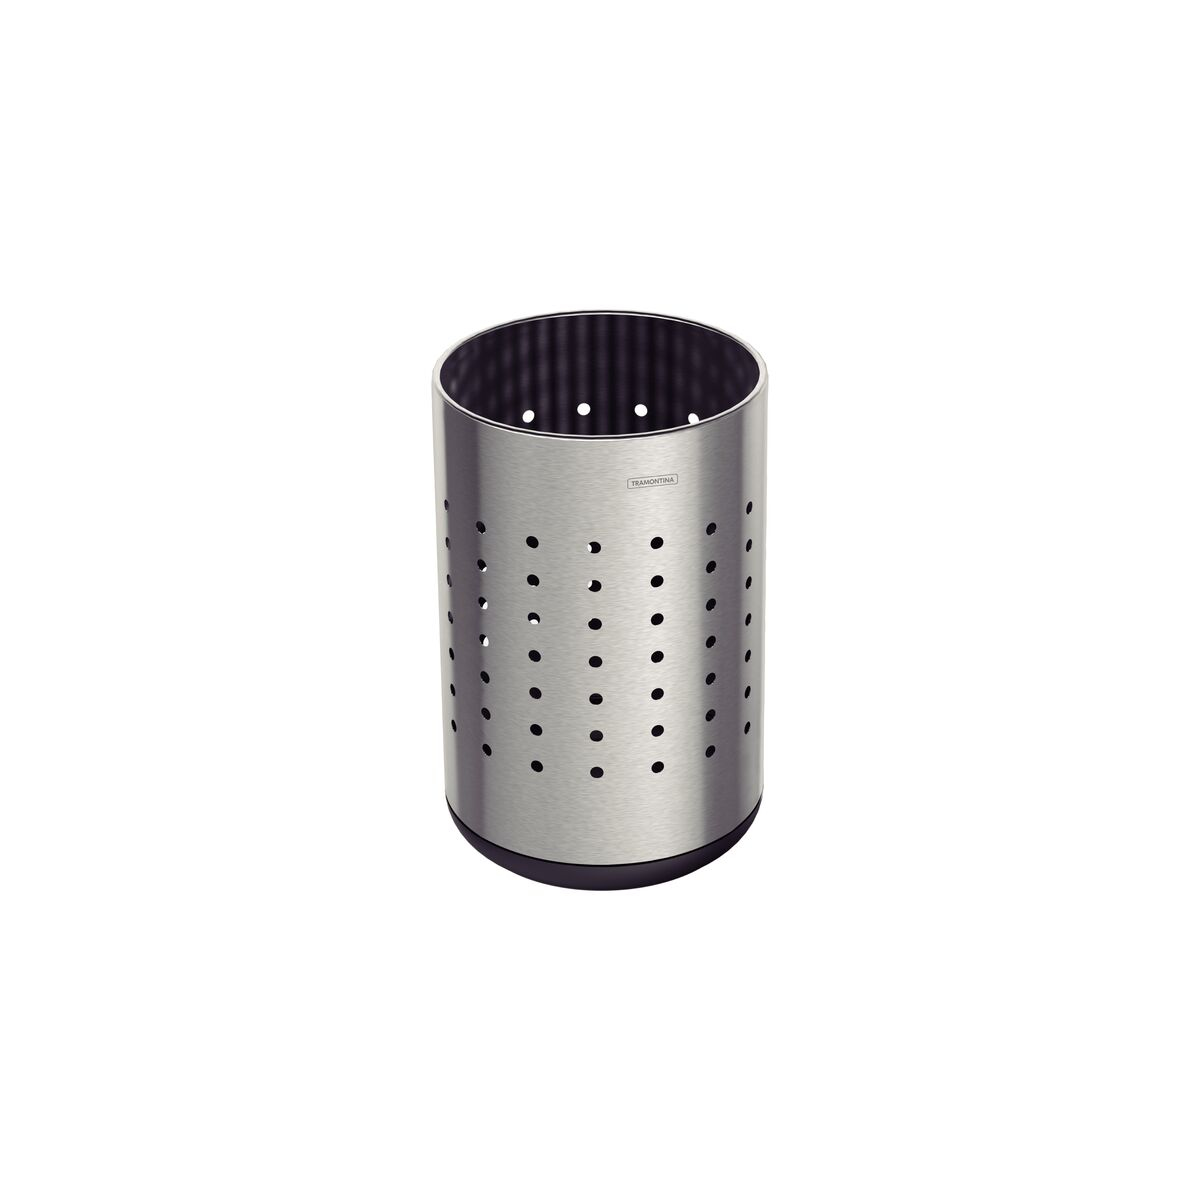 Tramontina Sardenha 10L stainless steel paper basket with a Scotch Brite finish and polypropylene base